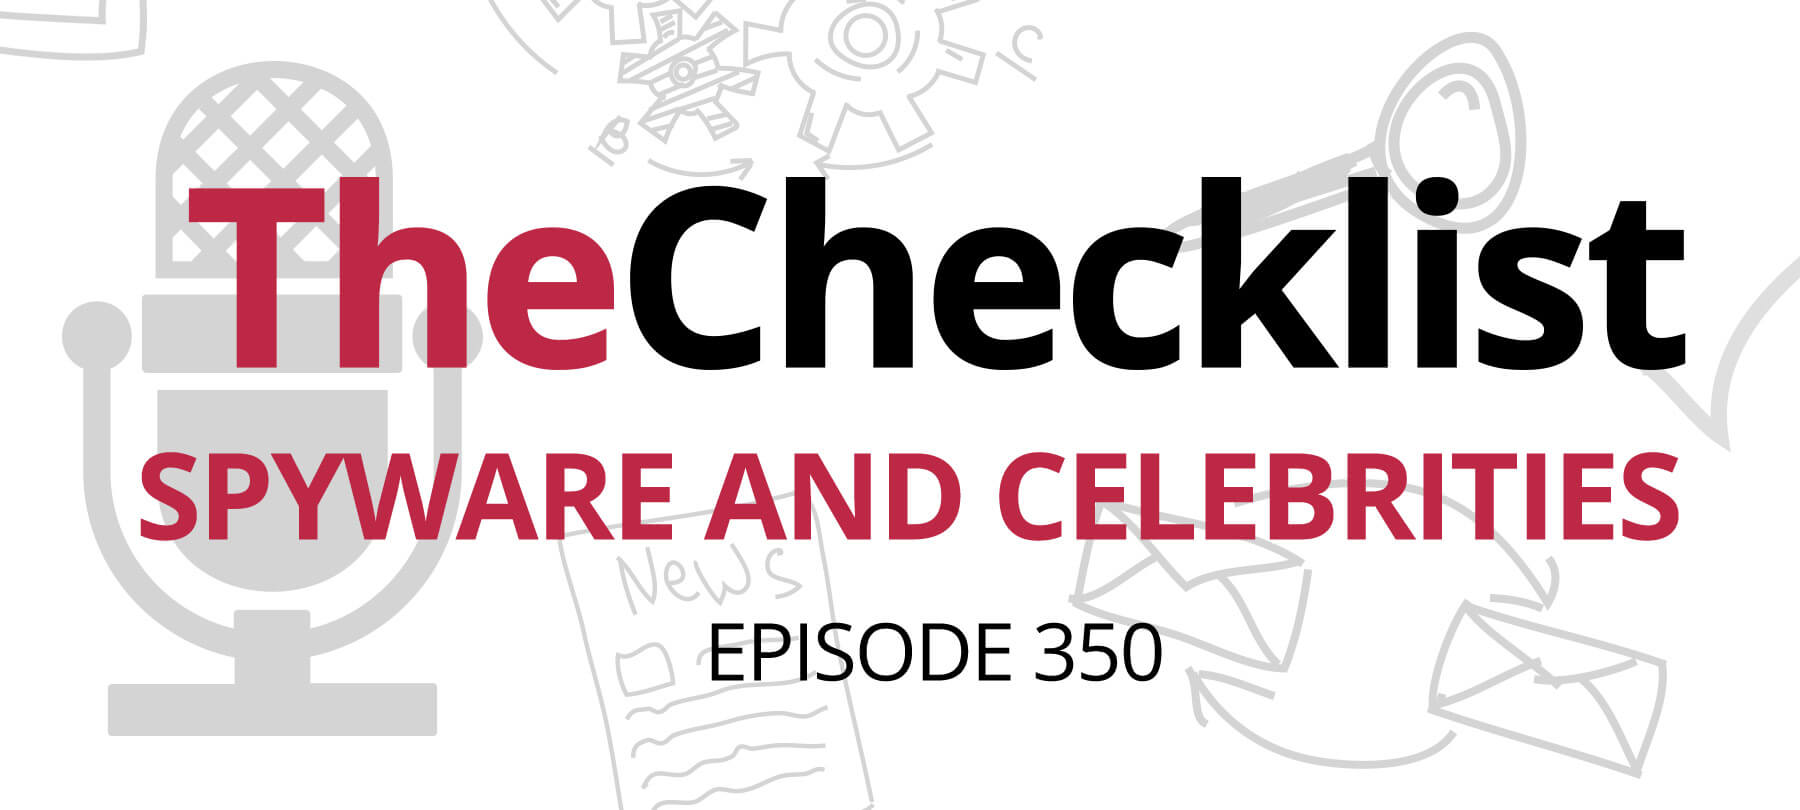 The Checklist logo, episode 350: Spyware and Celebrities banner